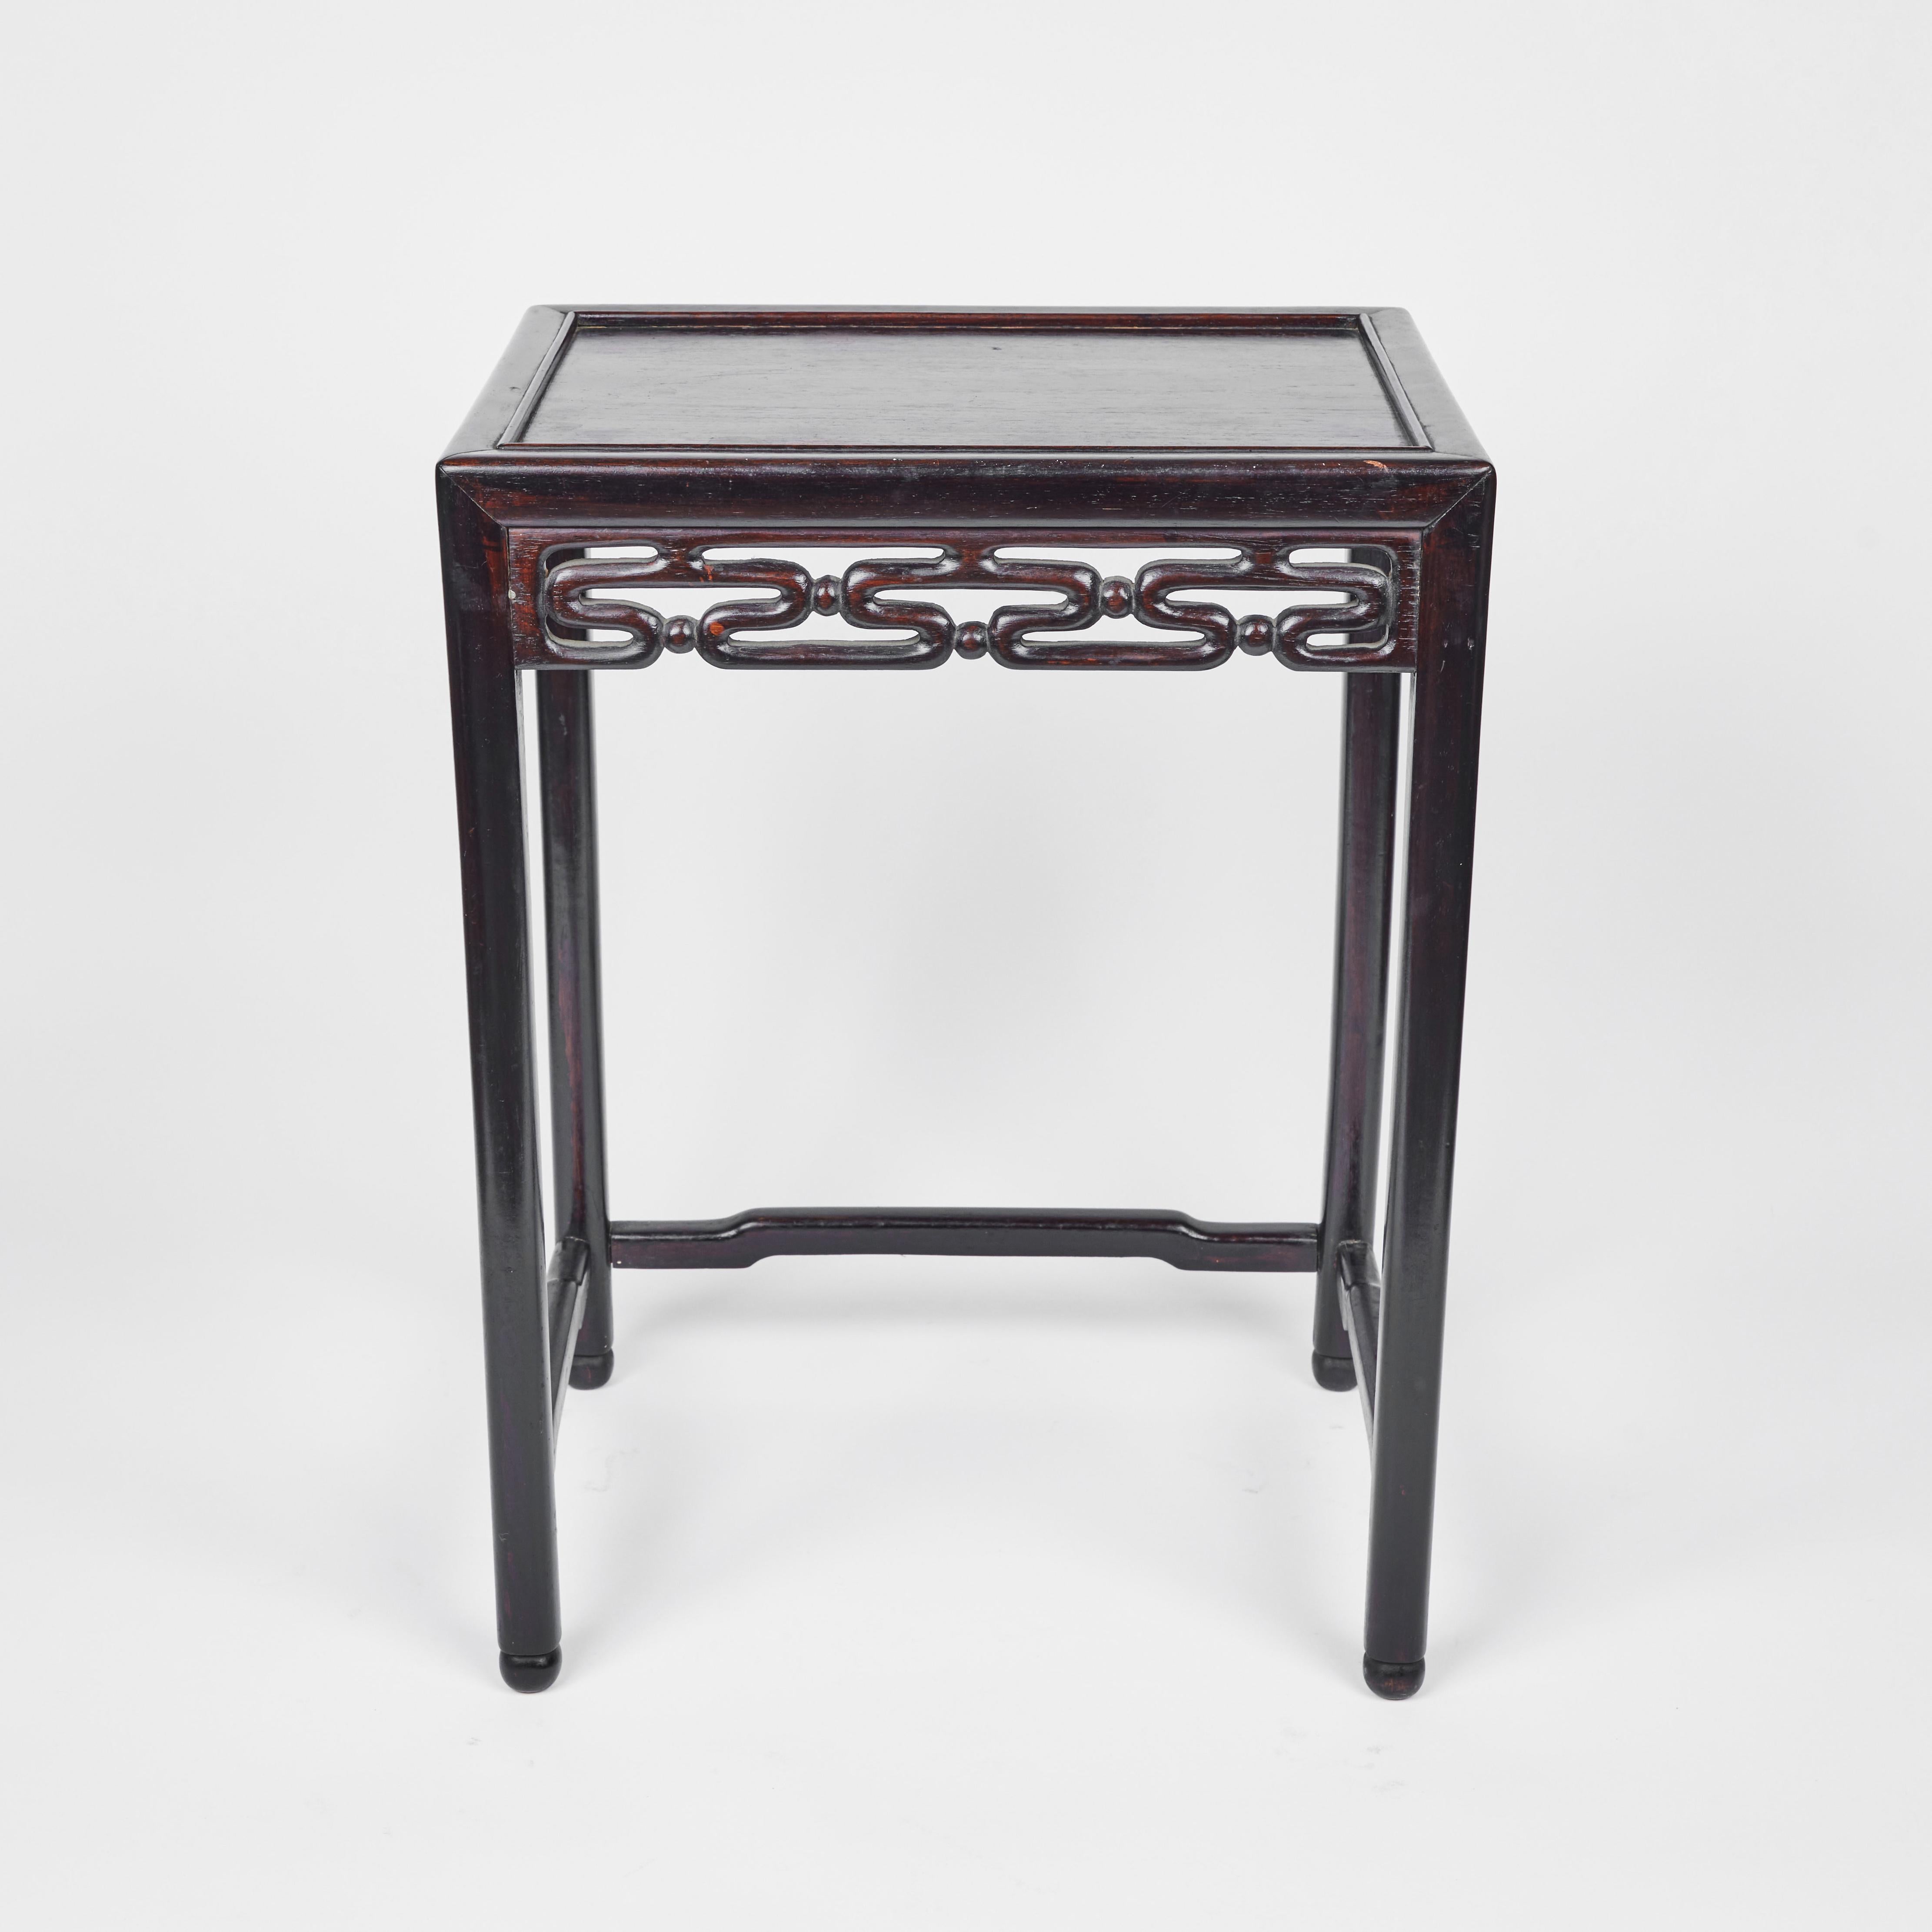 Vintage Wood Nesting Tables with Asian Motif 1